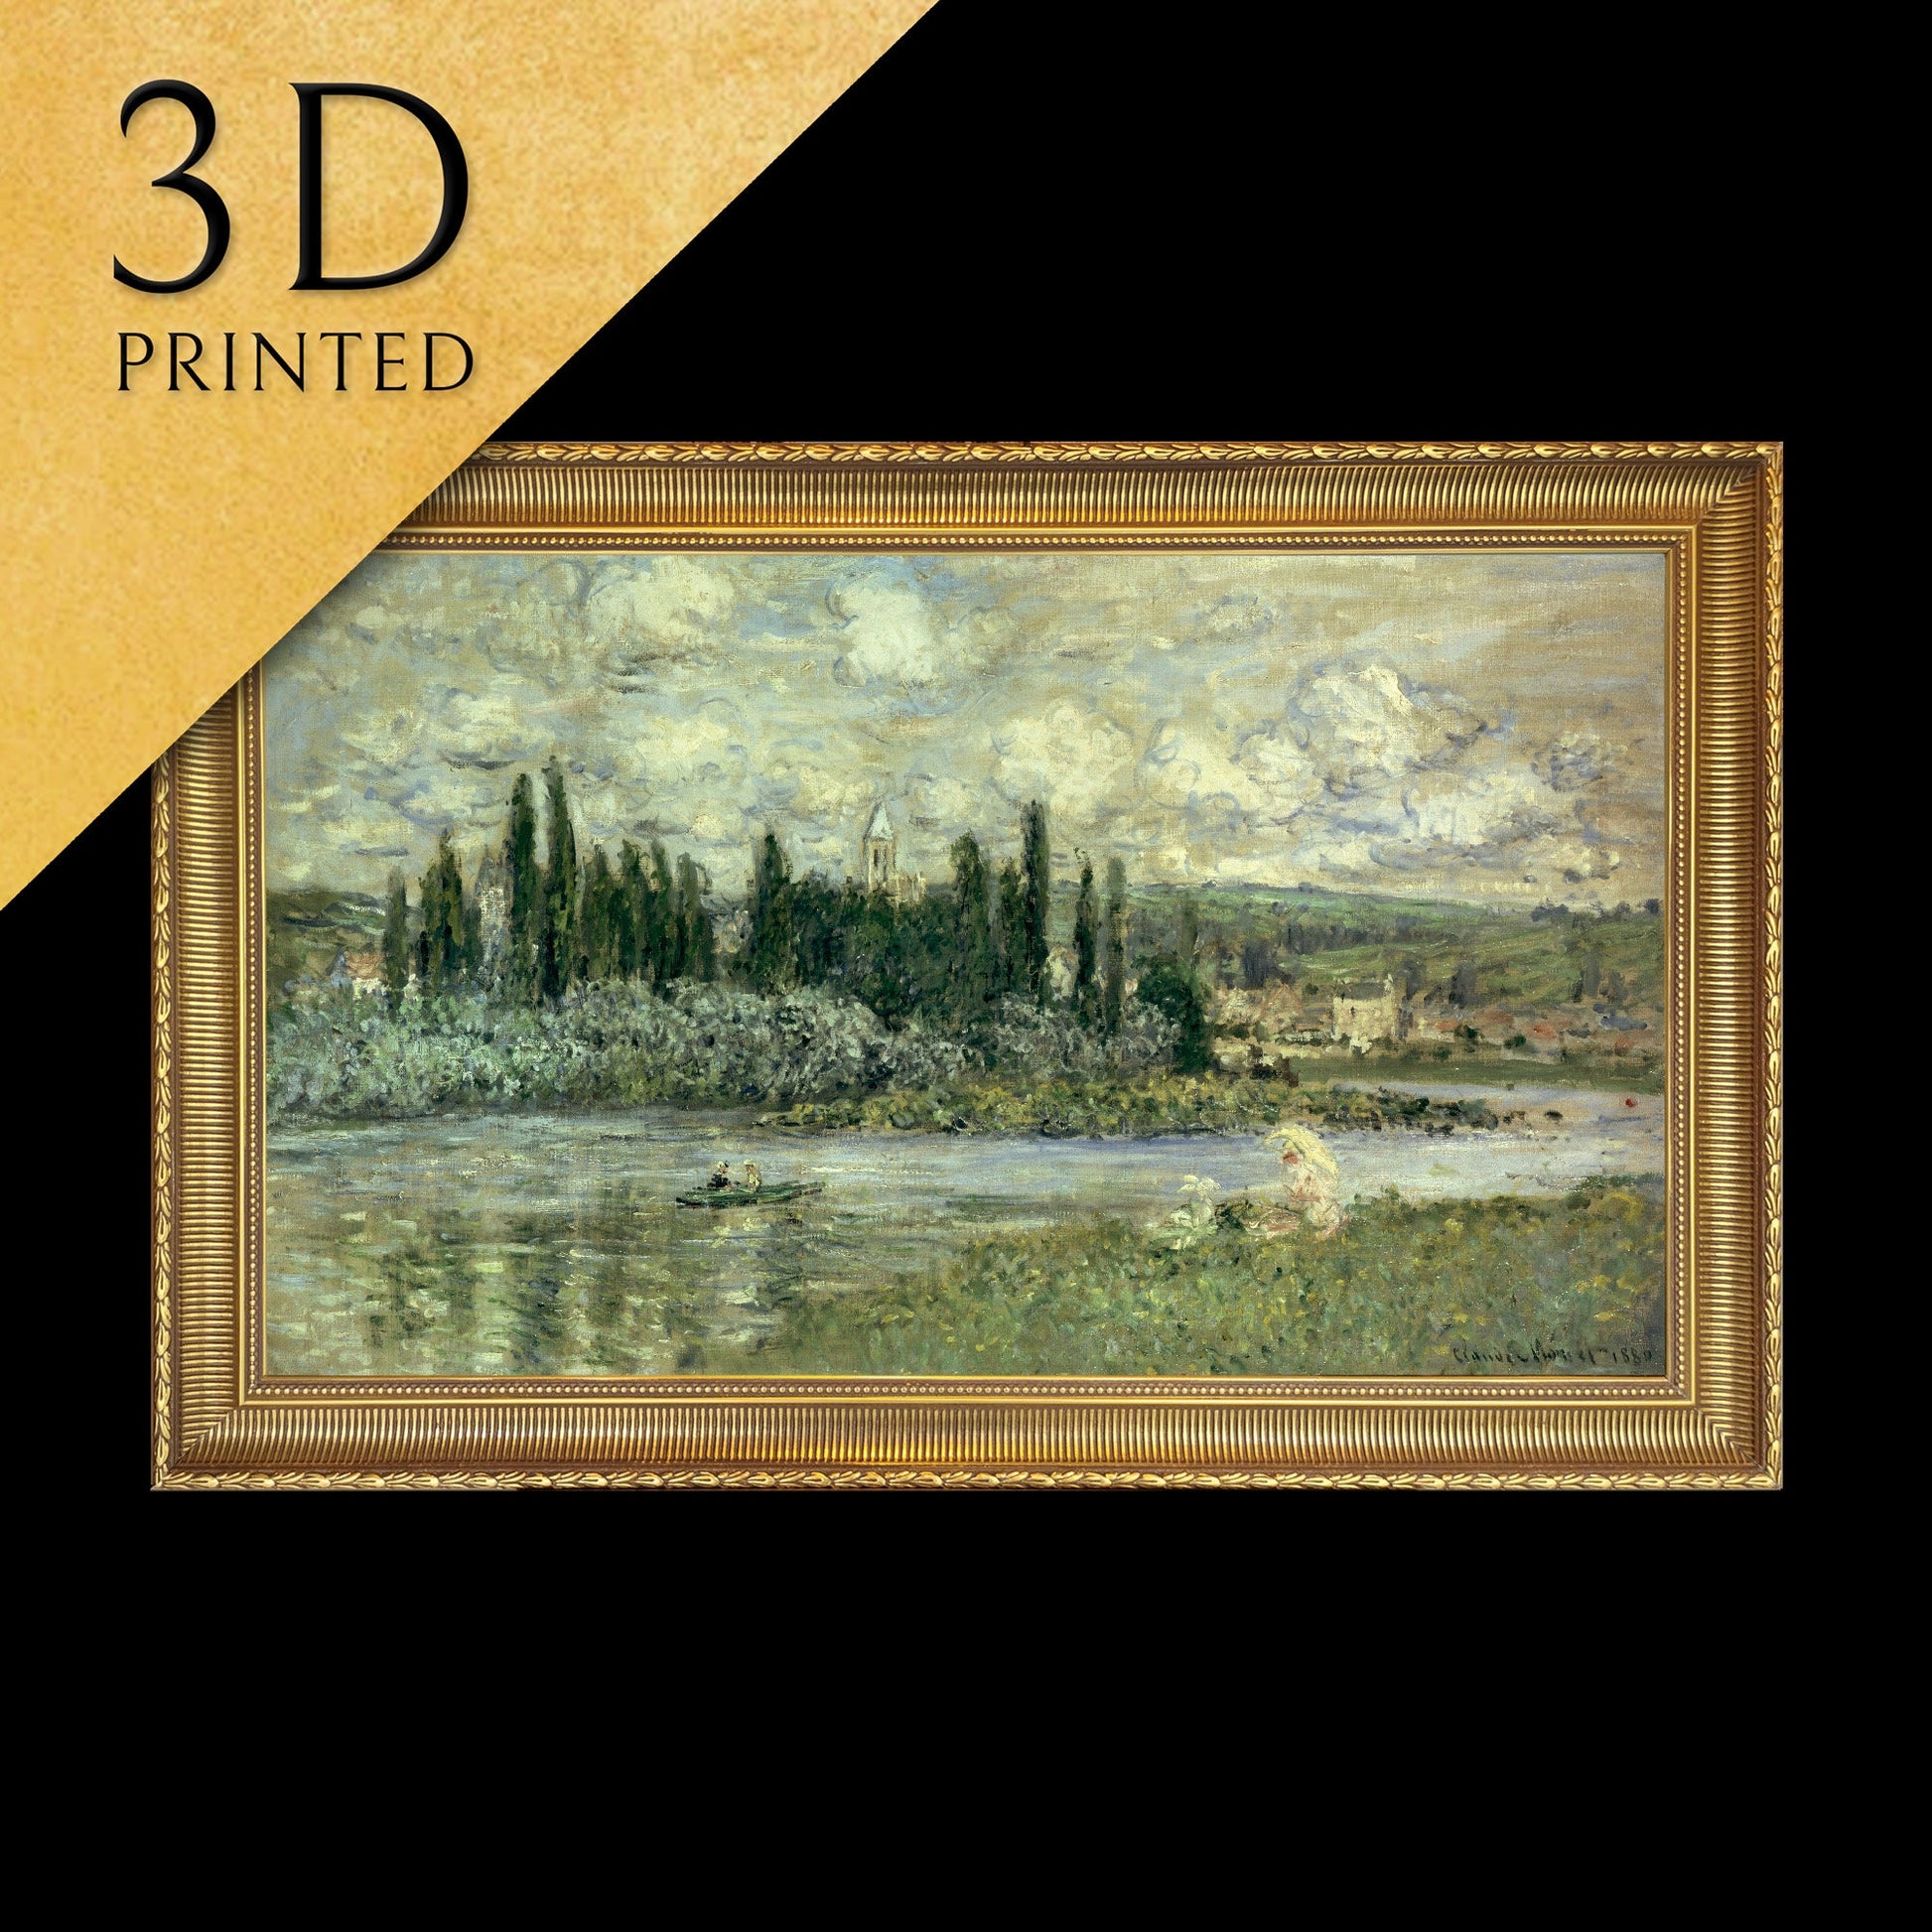 View of Vetheuil by Claude Monet, 3d Printed with texture and brush strokes looks like original oil-painting, code:011